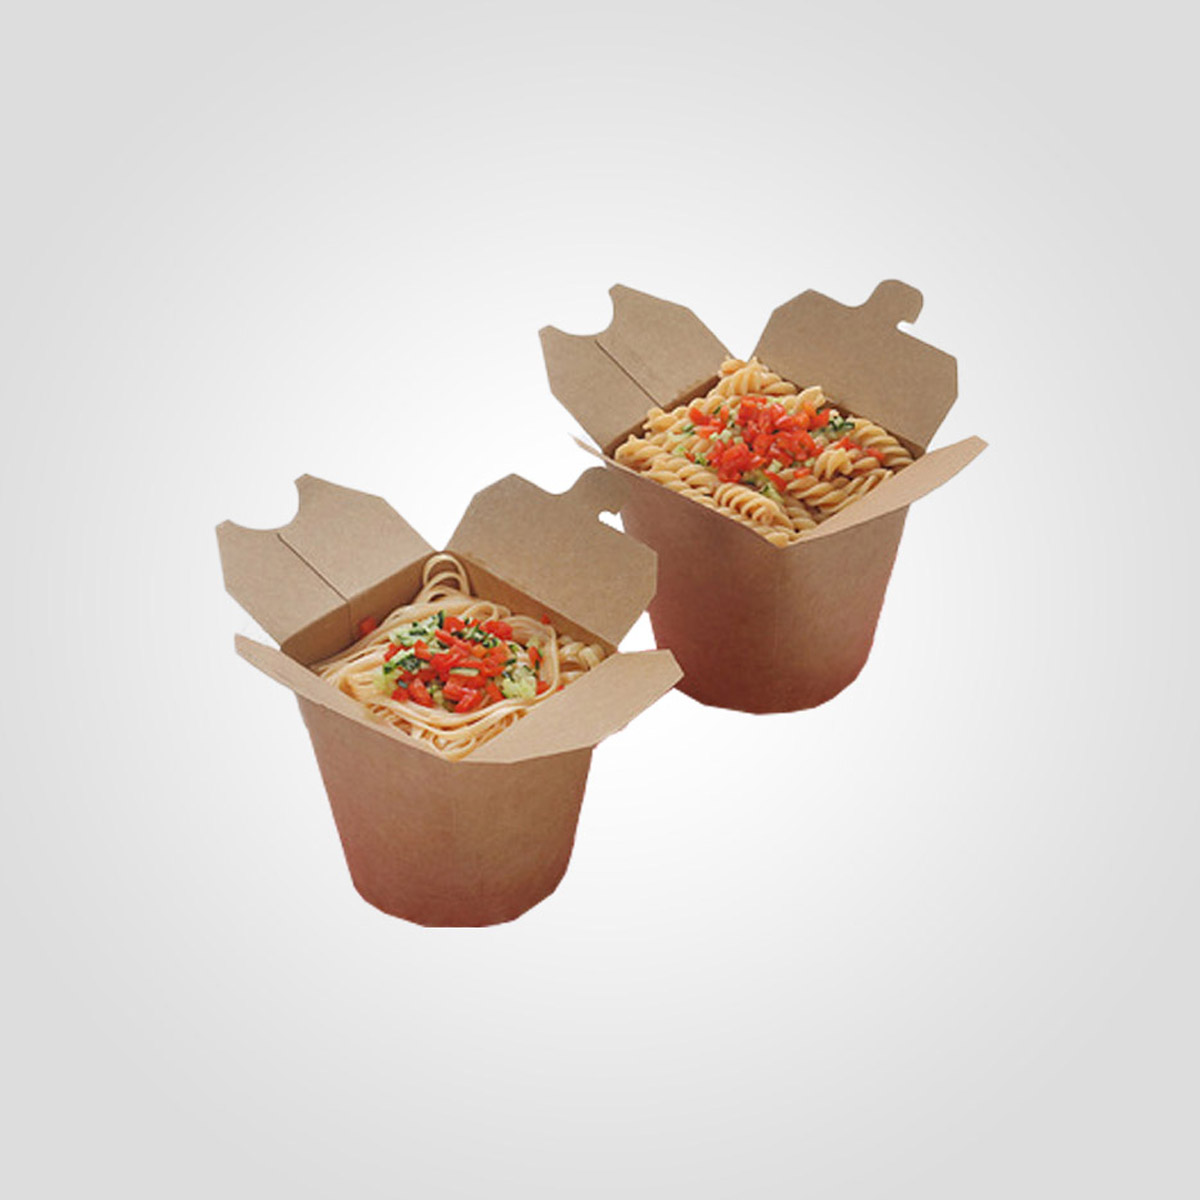 Custom Chinese Takeout Food Boxes